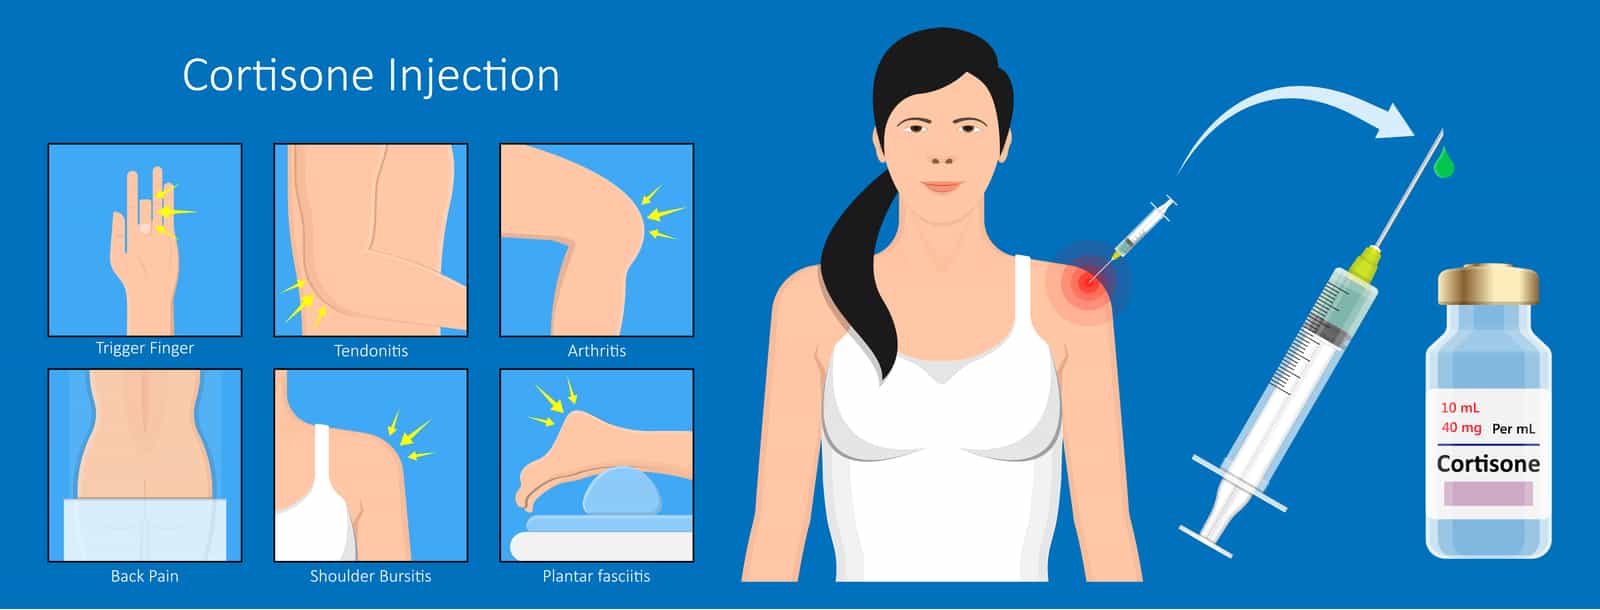 cortisone injections1